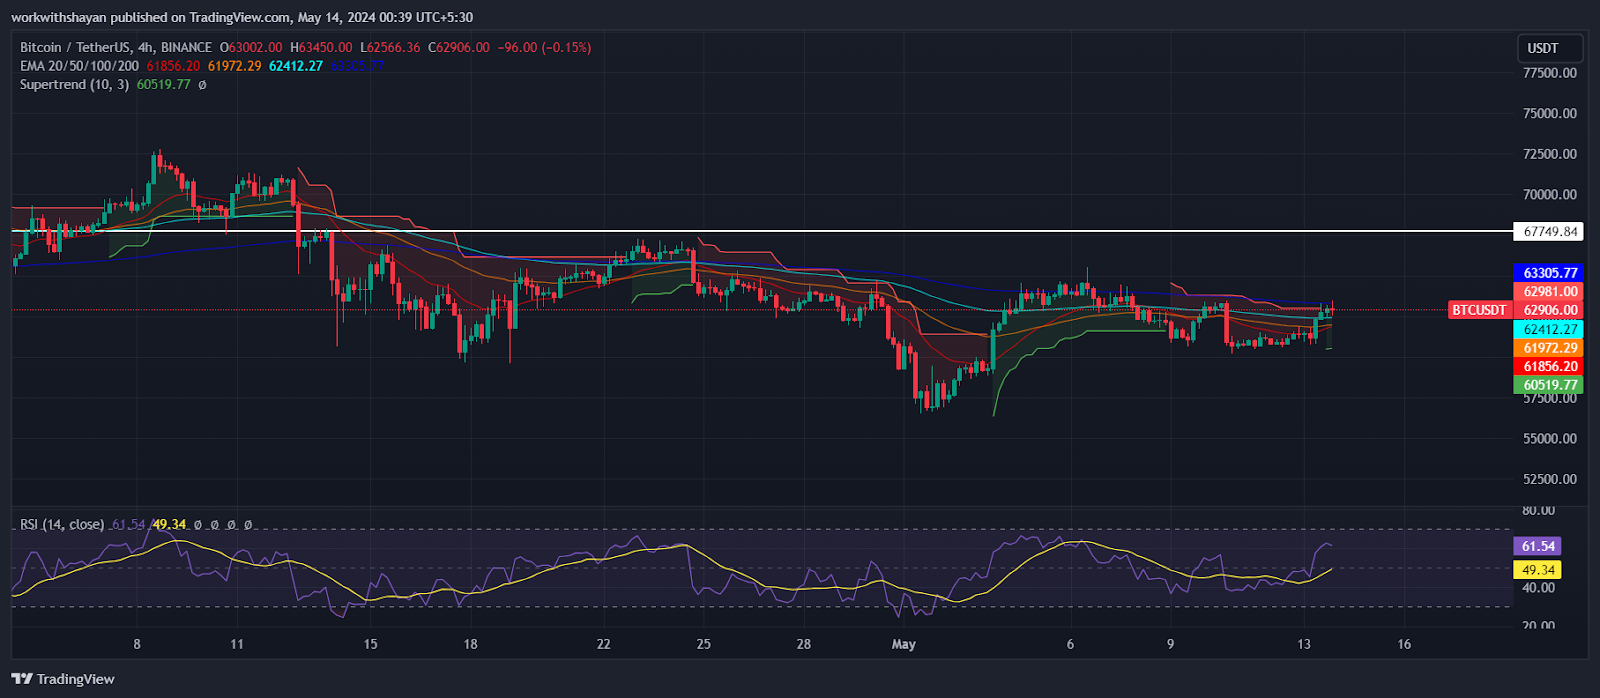 Bitcoin Funding Rates Surge On DyDx And Deribit Following $63K Breakout: Will Bulls Avoid A Top?